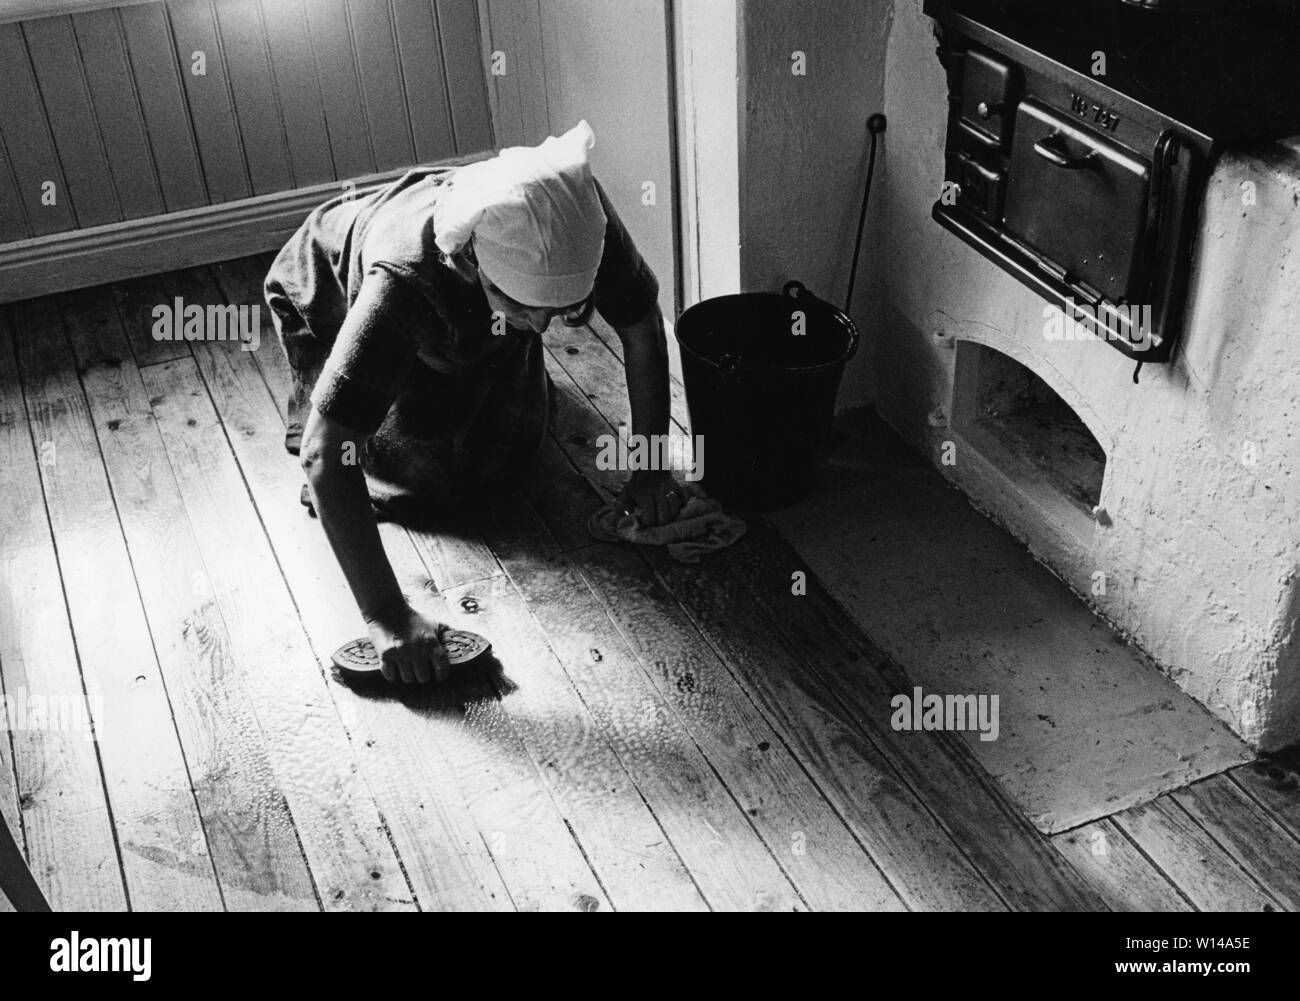 Cleaning the floor back then. An old woman is lying on the floor and use a scrubbing brush to get the kitchen floor clean. An old wooden kitchen stove is seen. Stock Photo